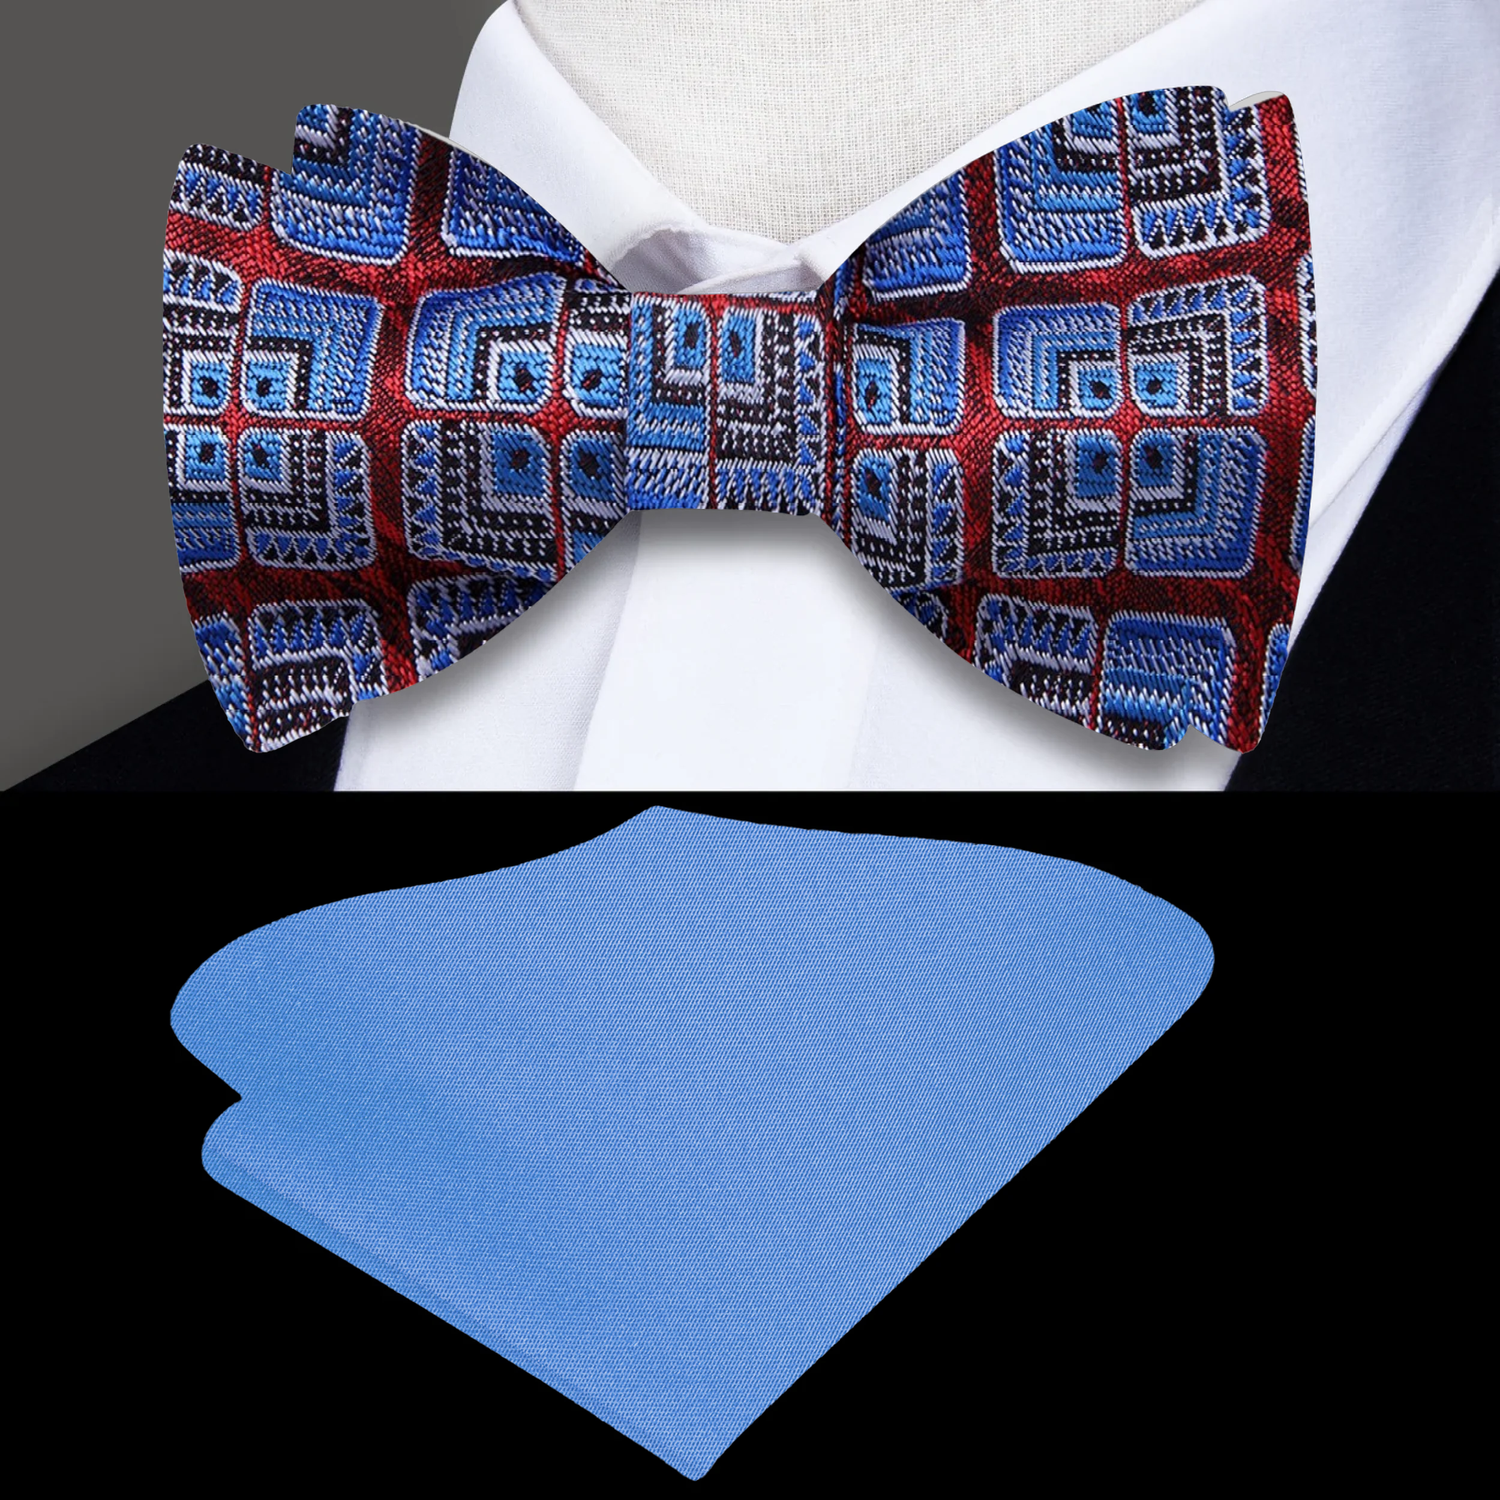 A Red, Blue, Brown Geometric Floral Pattern Silk Self Tie Bow Tie, With Blue Pocket Square